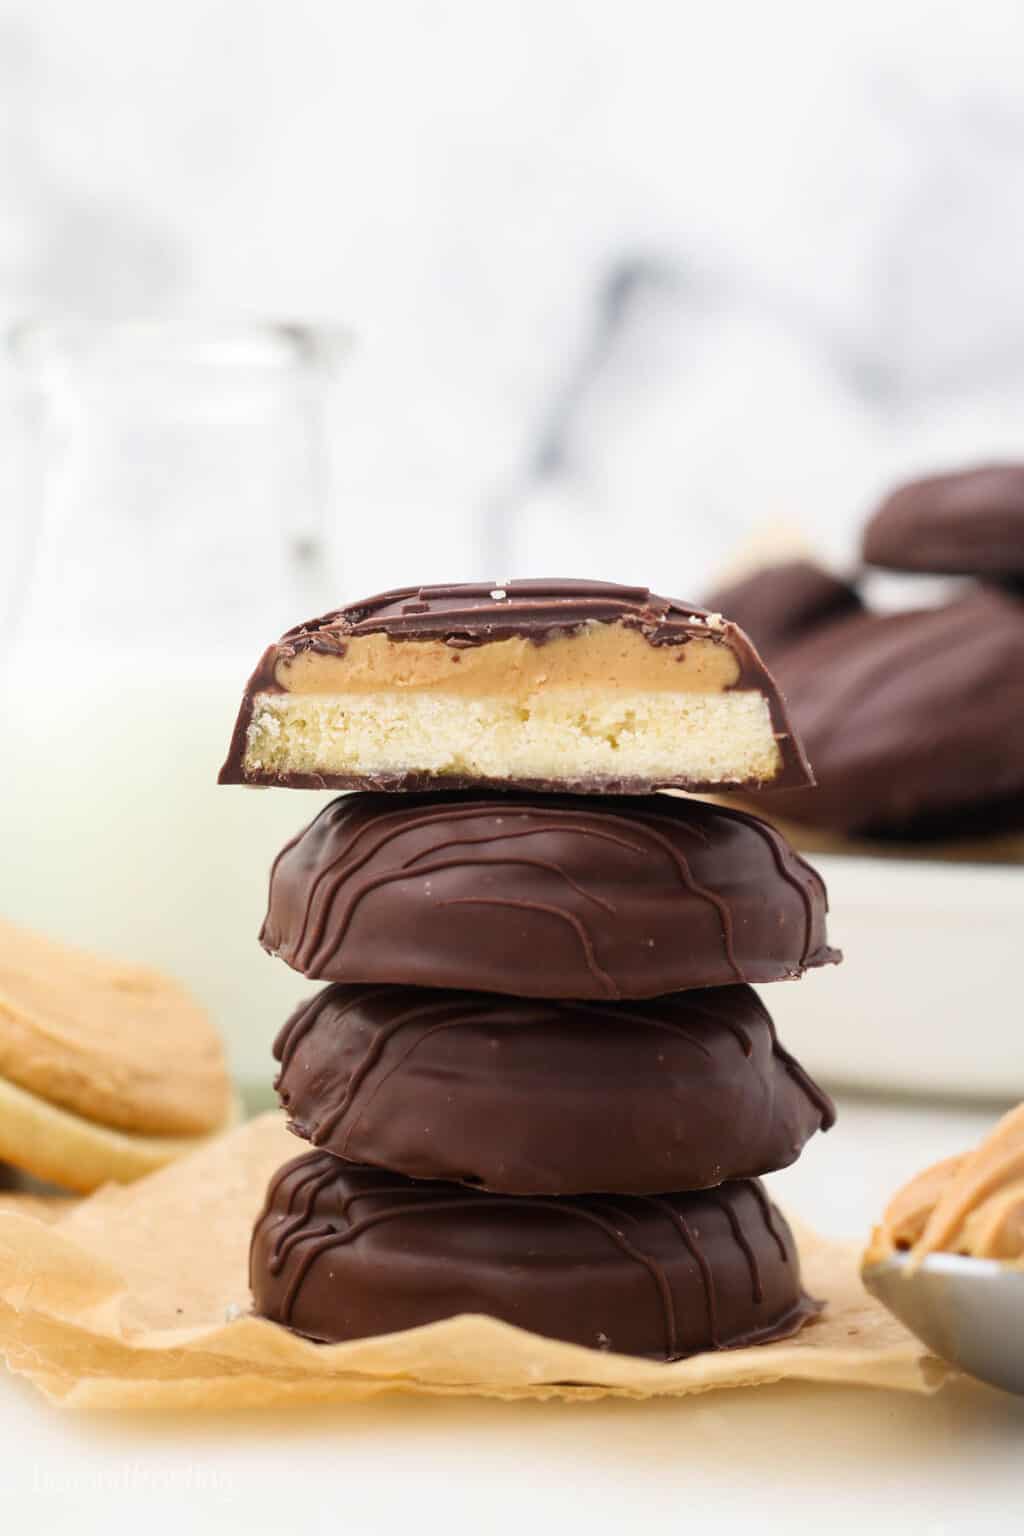 Tagalong Cookies (Copycat Recipe) | Beyond Frosting